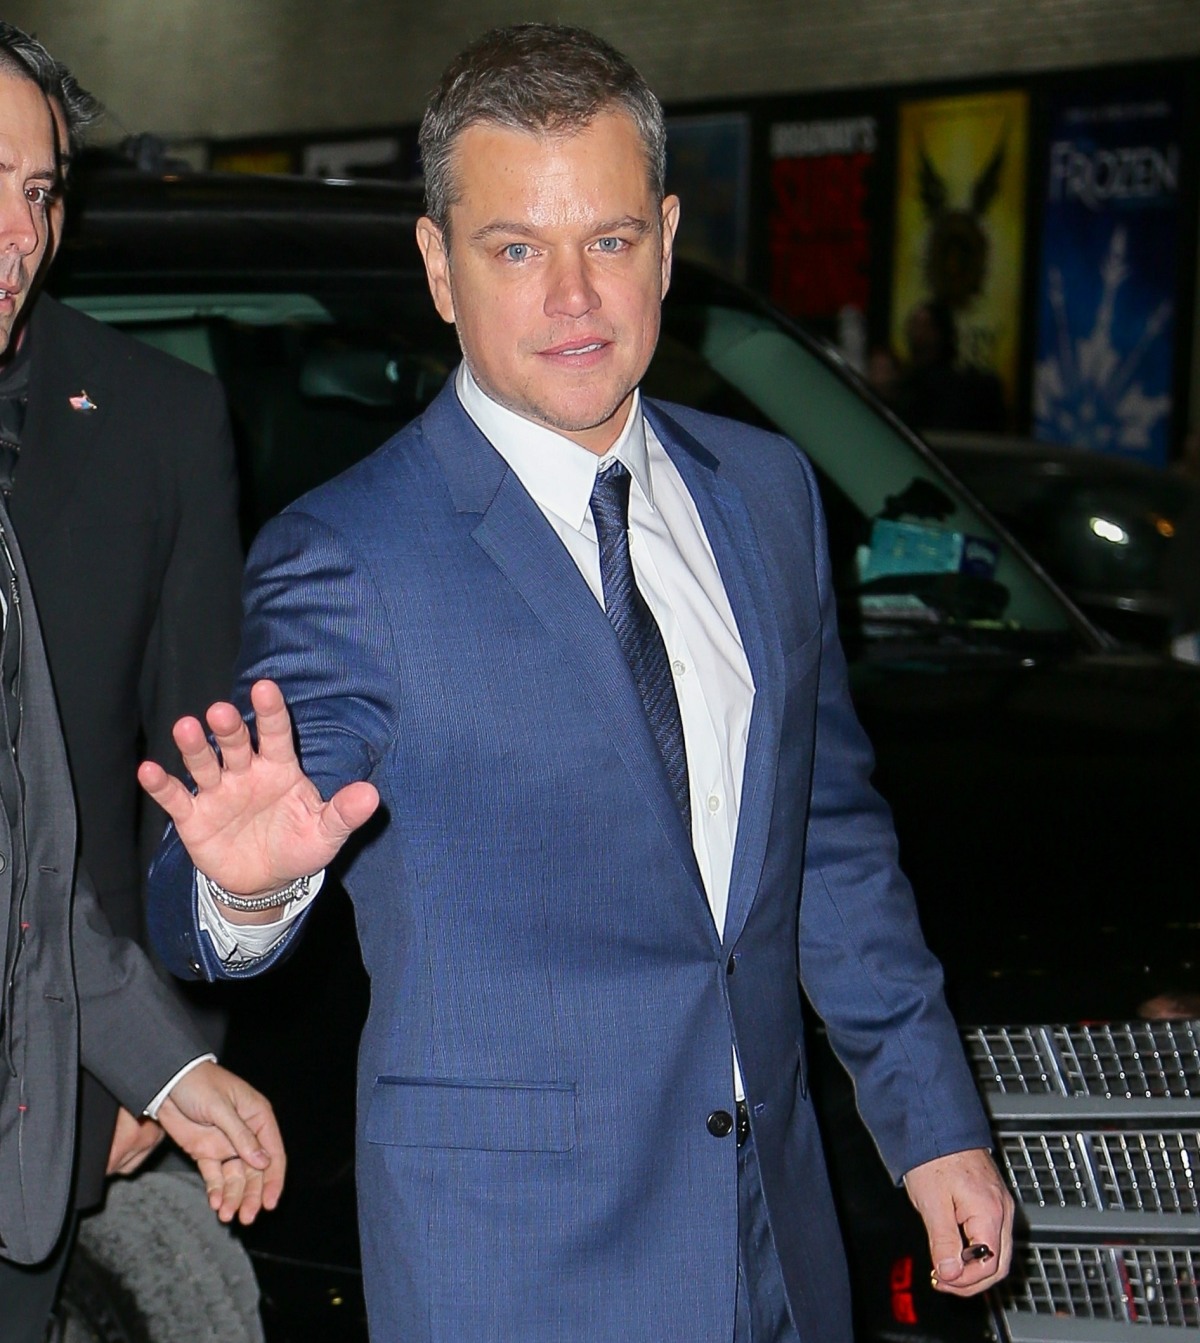 Matt Damon seen leaving the The Late Show with Stephen Colbert in NYC